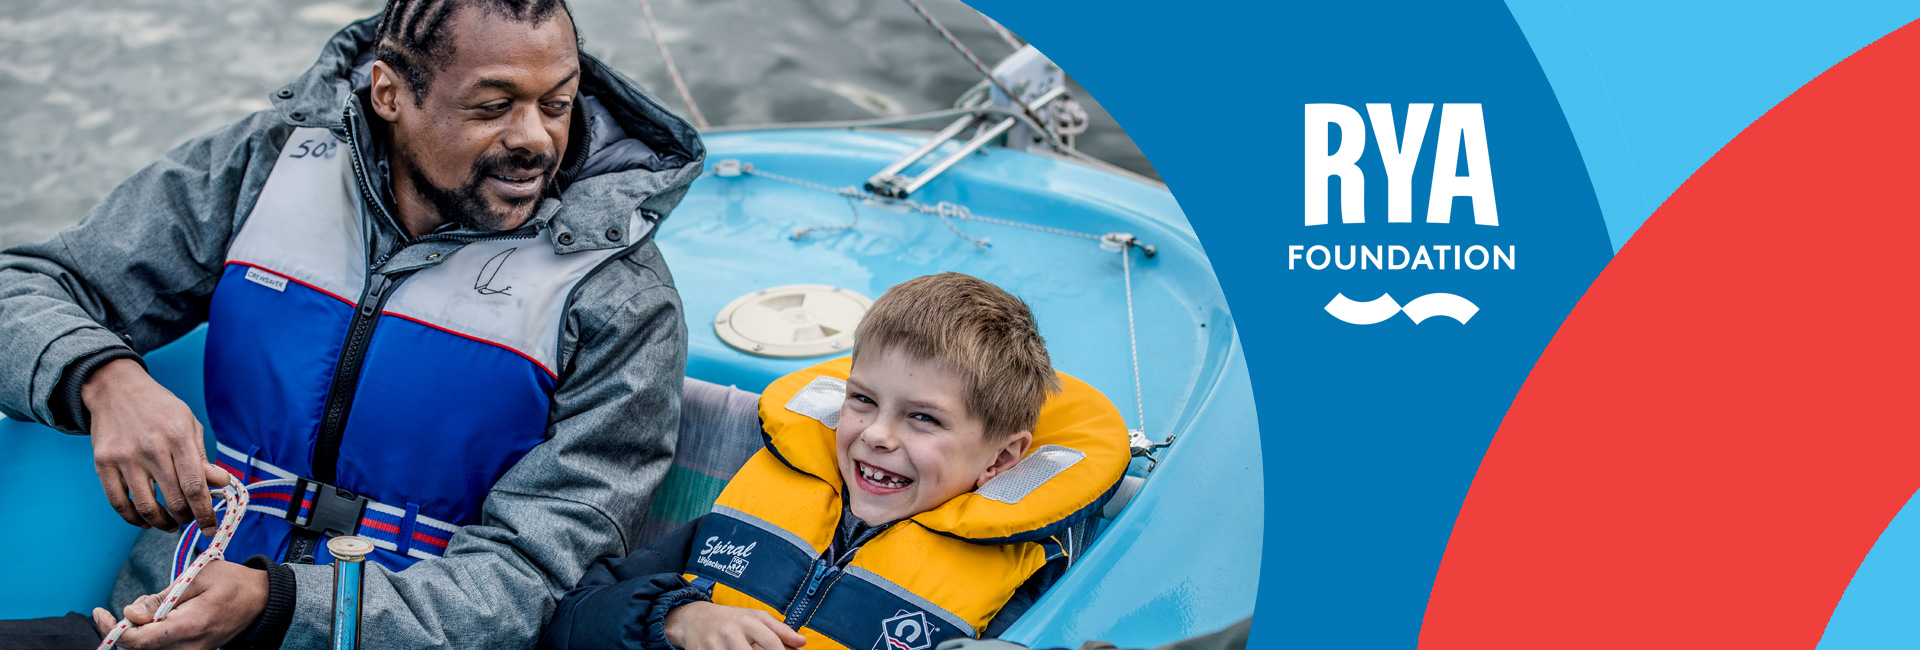 RYA foundation hero with logo and image of young boy and man smiling in sailing dinghy.